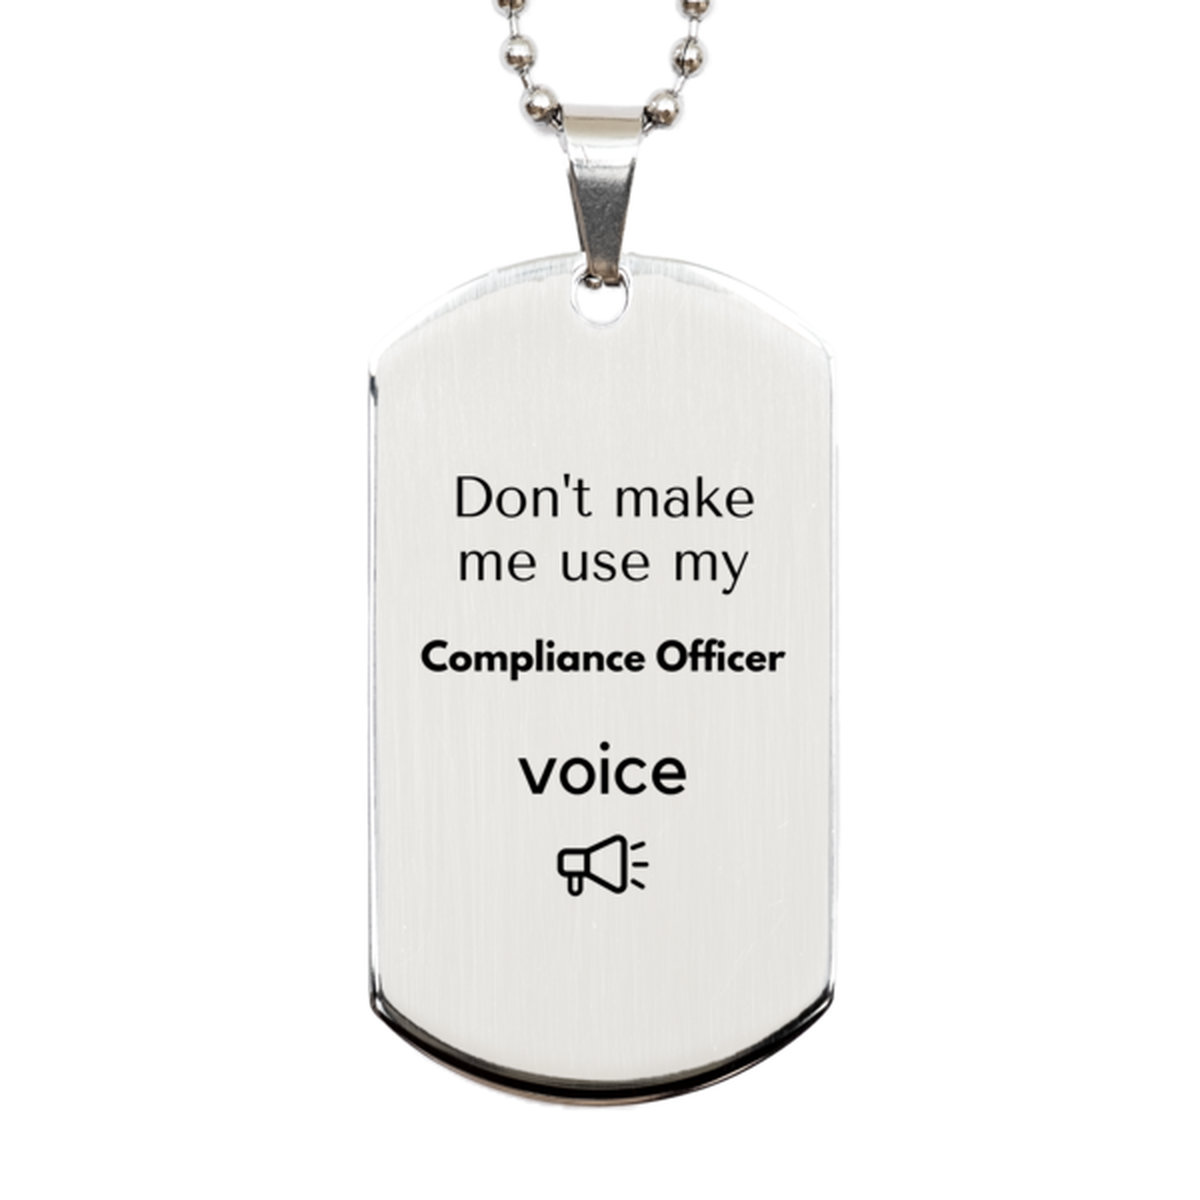 Don't make me use my Compliance Officer voice, Sarcasm Compliance Officer Gifts, Christmas Compliance Officer Silver Dog Tag Birthday Unique Gifts For Compliance Officer Coworkers, Men, Women, Colleague, Friends